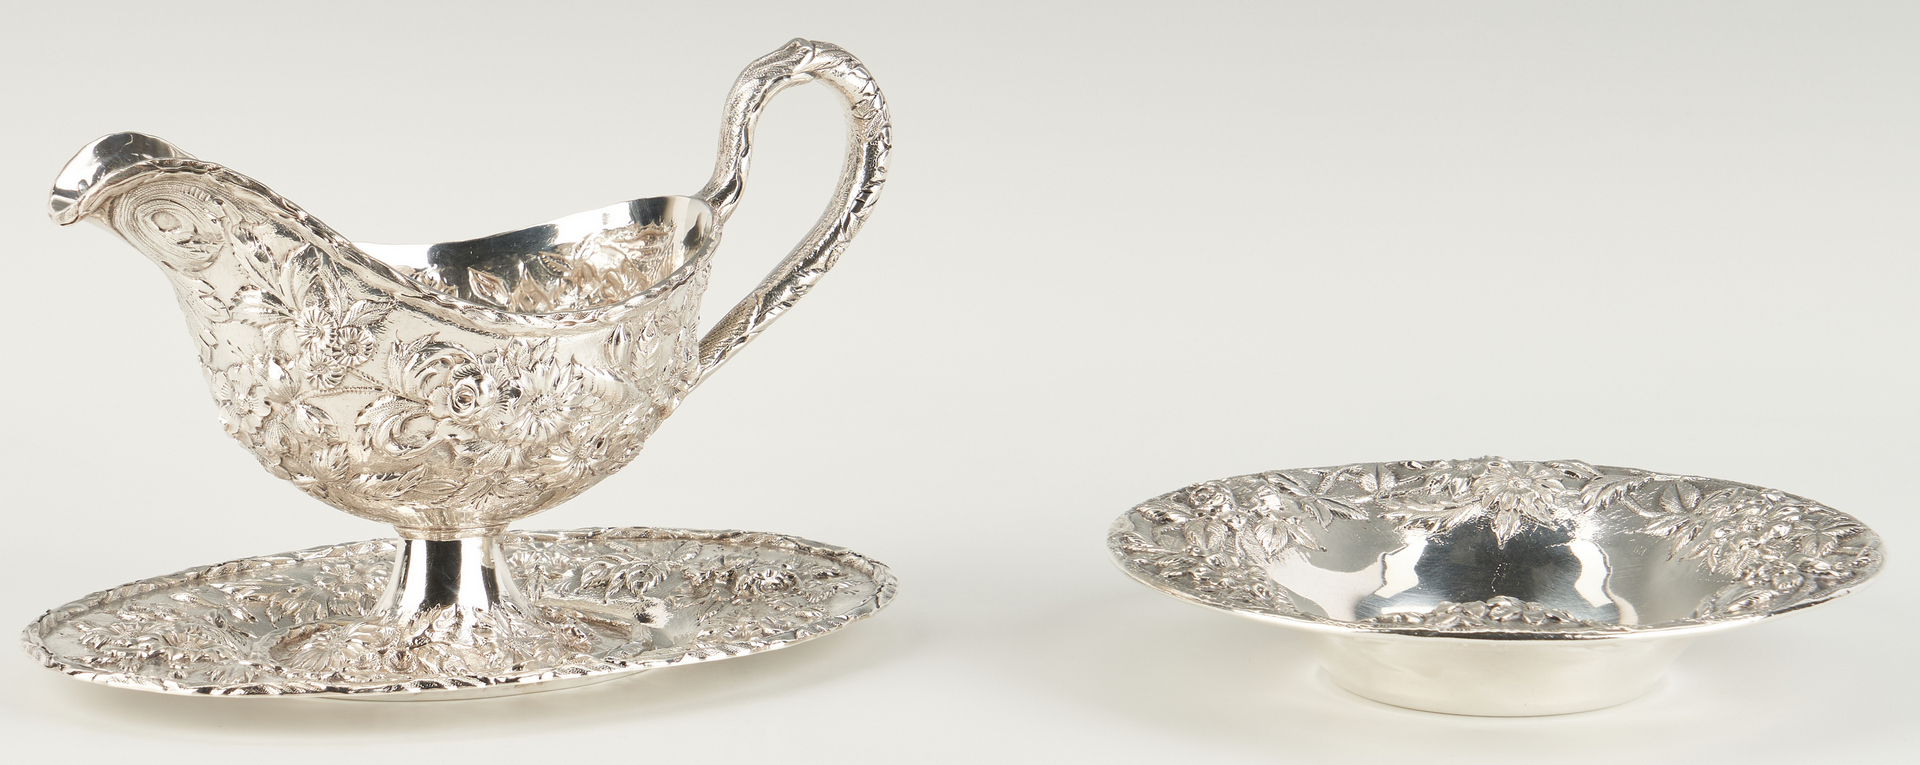 Lot 529: Kirk Repousse Silver Gravy Boat and Candy Dish